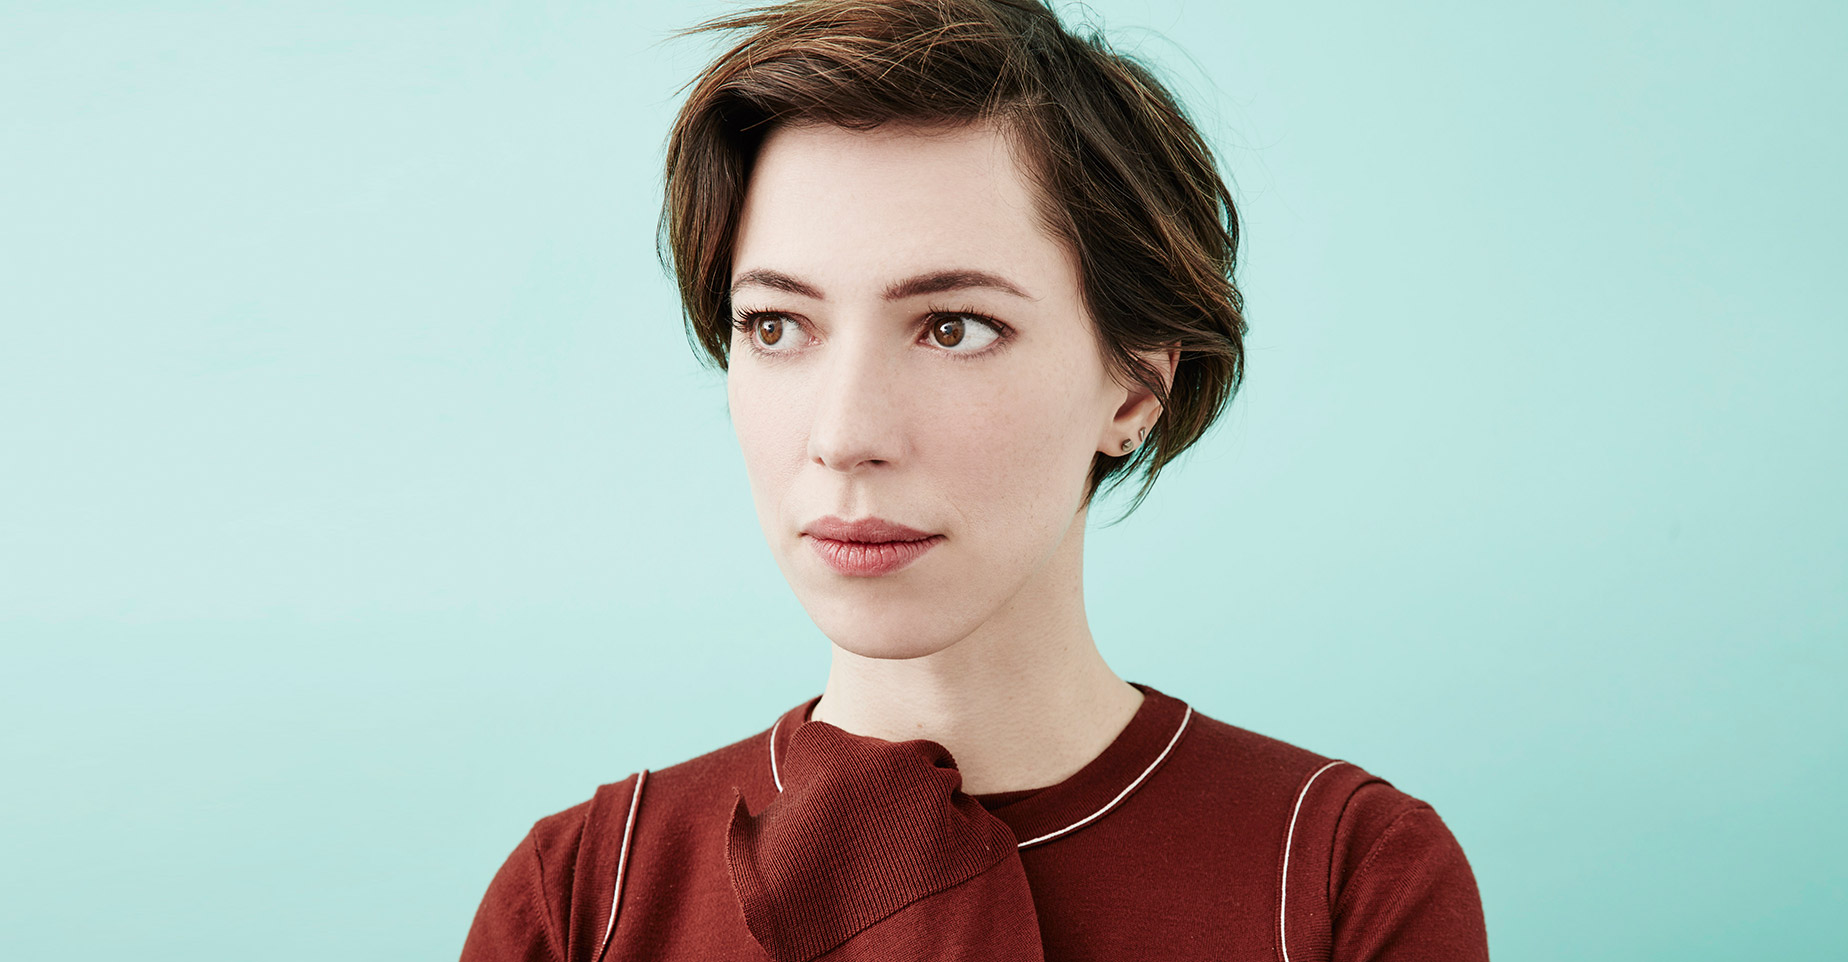 danny ohearn recommends rebecca hall naked pic